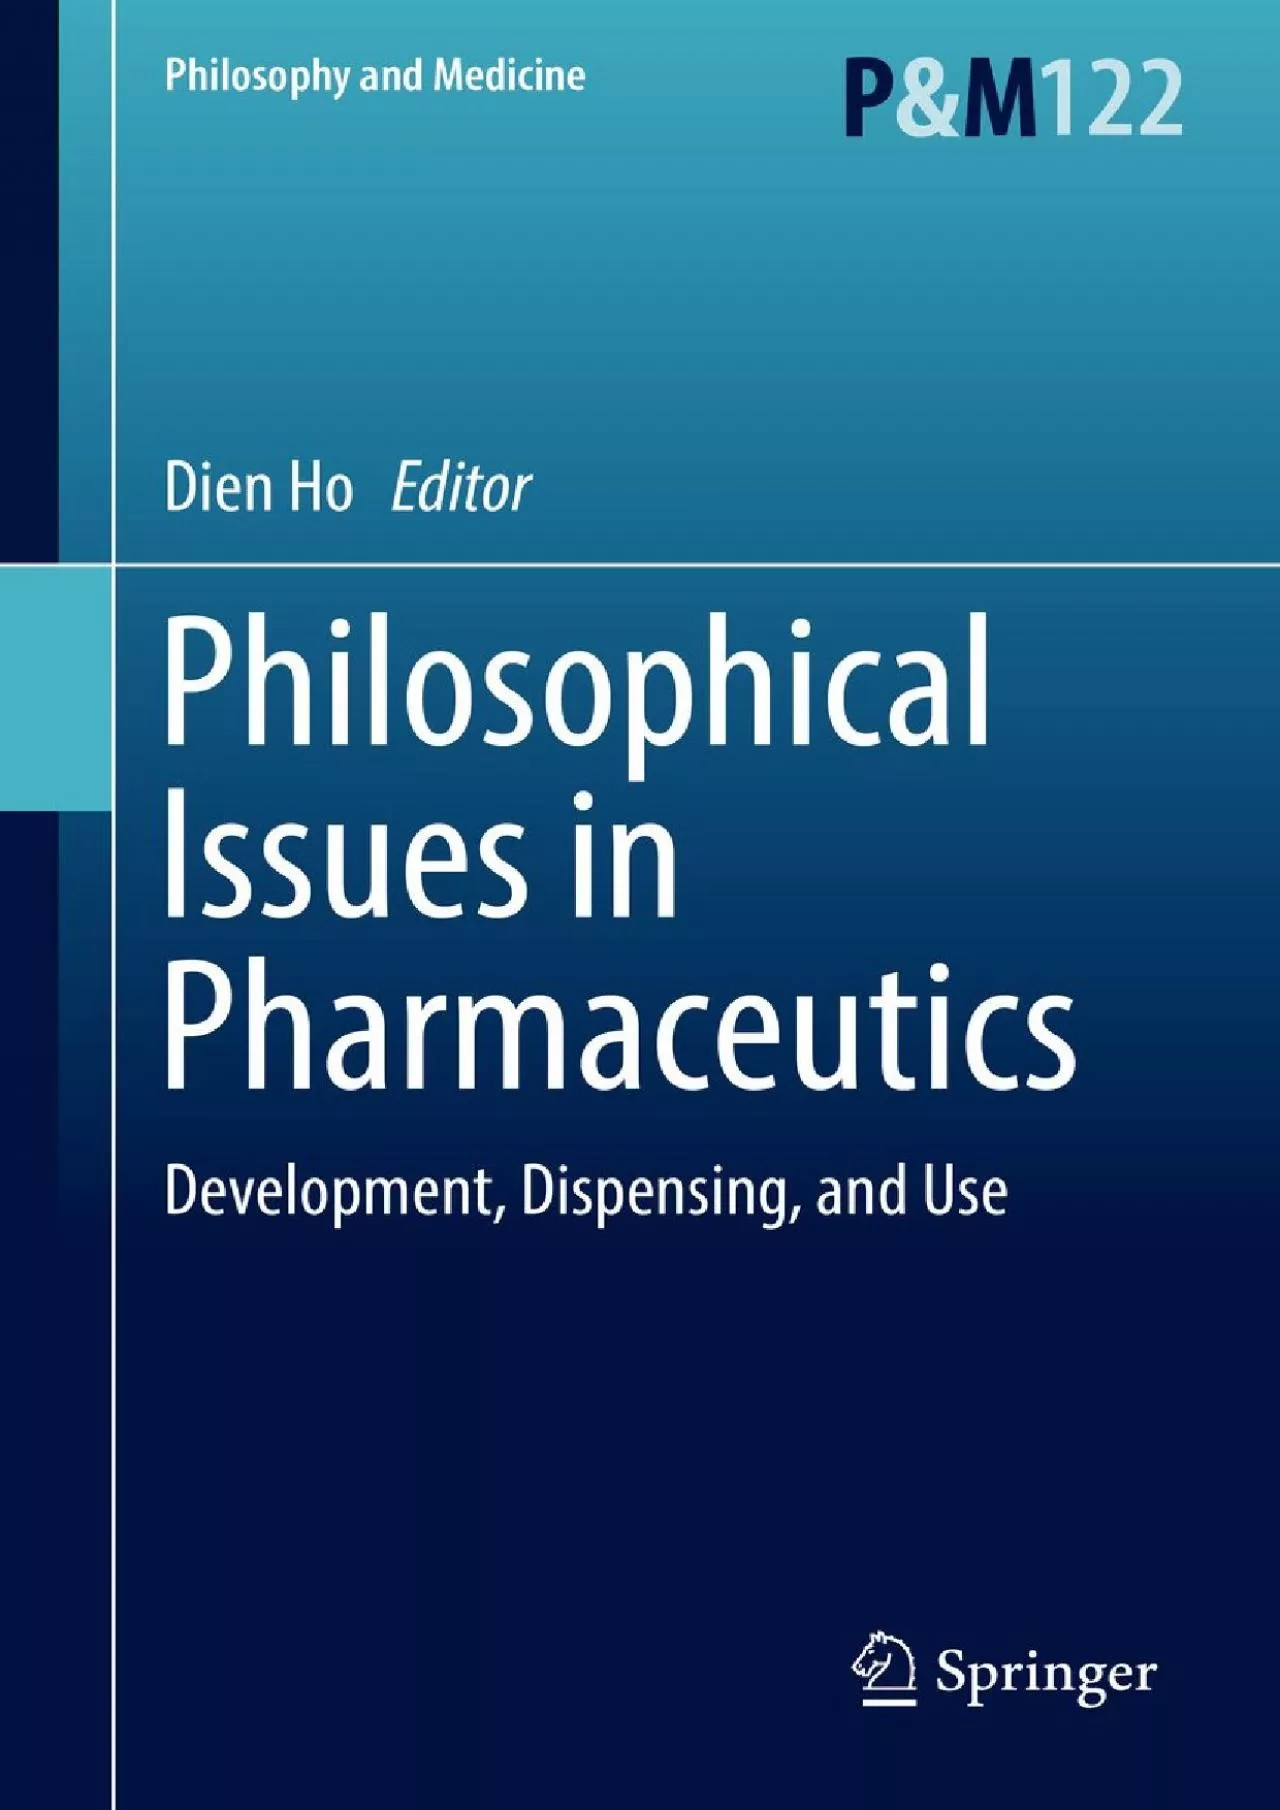 (DOWNLOAD)-Philosophical Issues in Pharmaceutics: Development, Dispensing, and Use (Philosophy